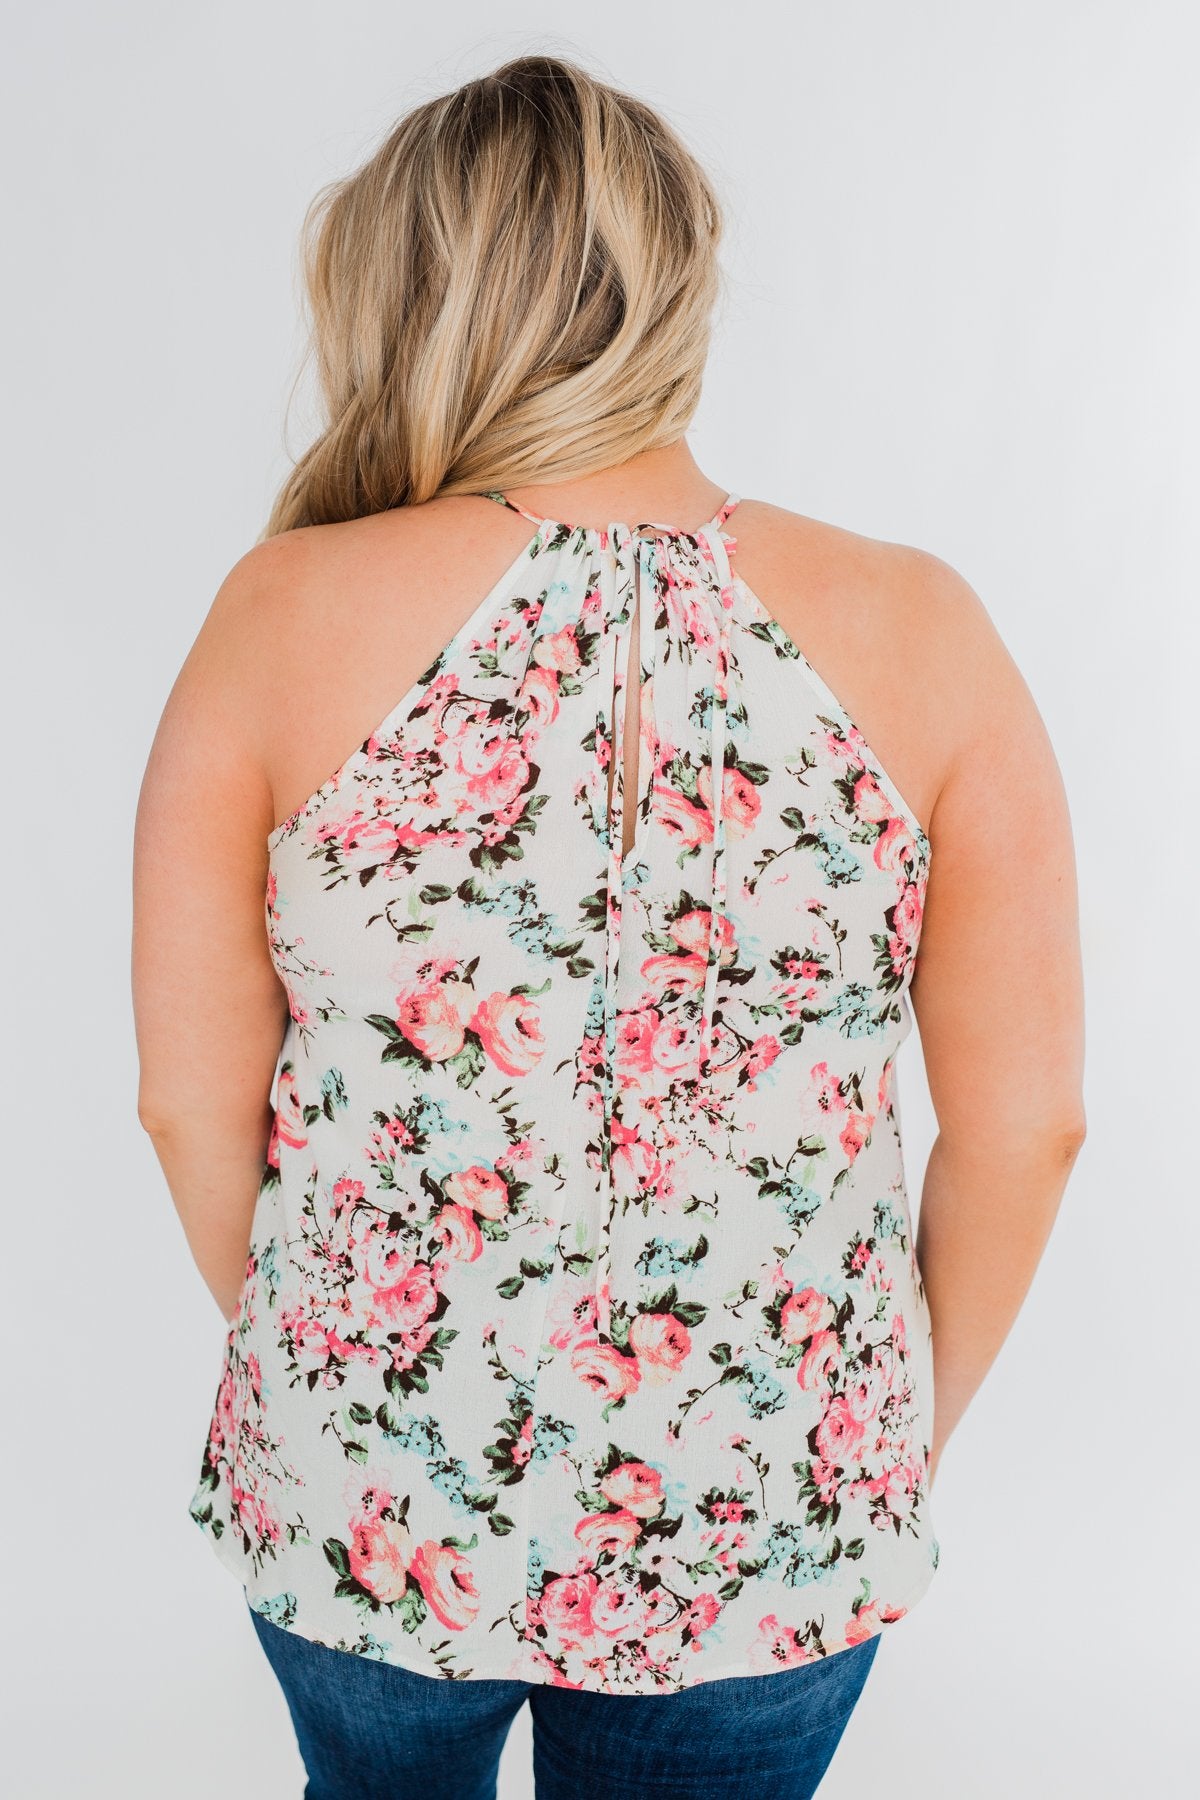 Always & Forever Floral Crochet Tank Top- Ivory